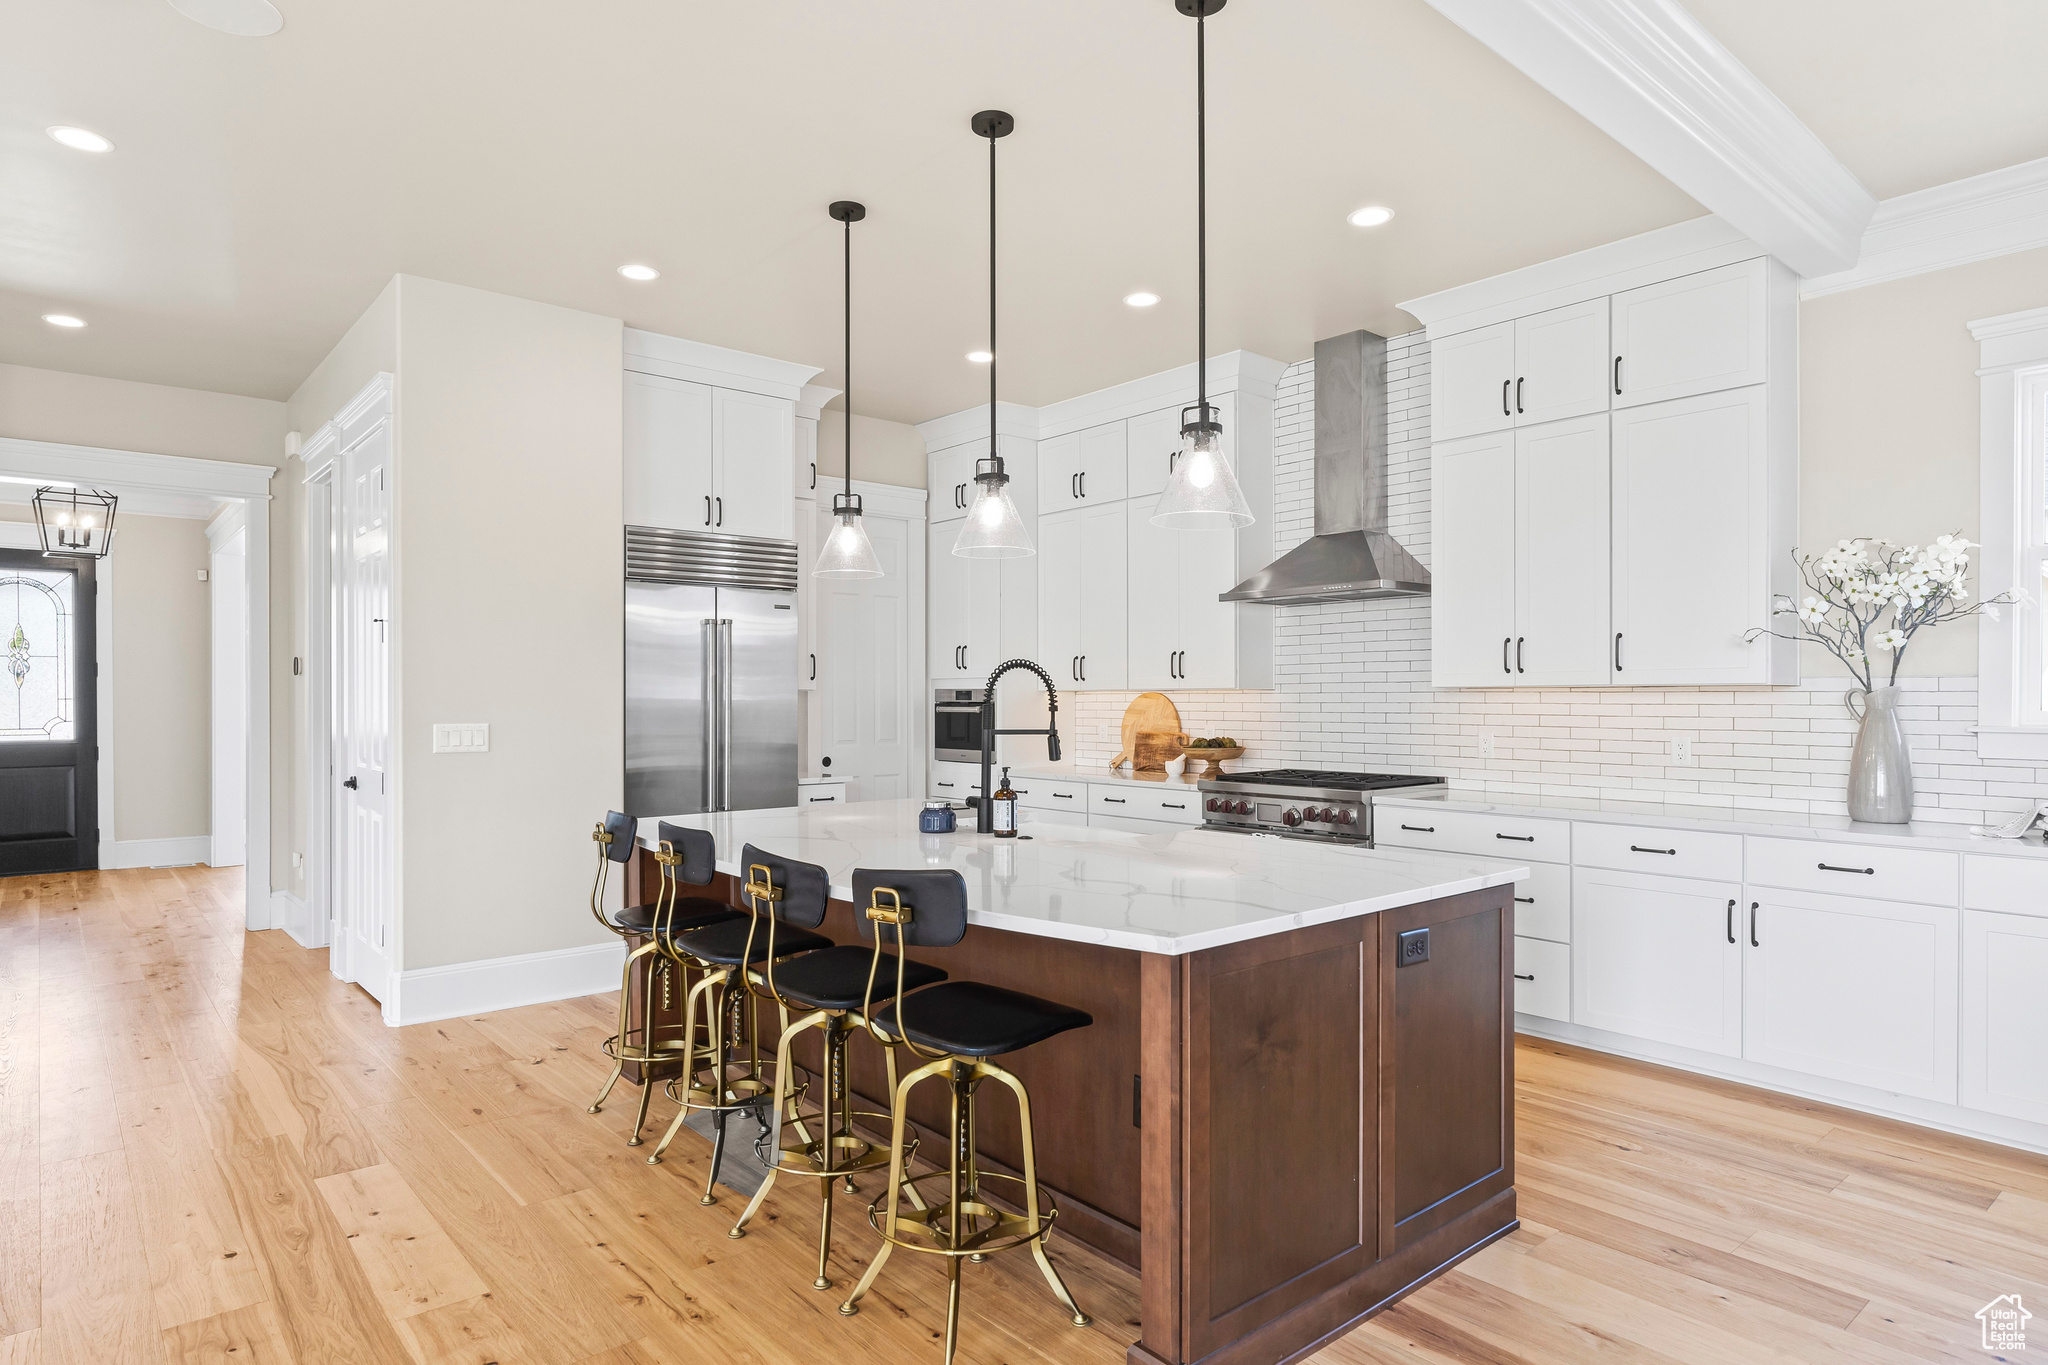 Kitchen featuring stove, wall chimney exhaust hood, light hardwood / wood-style flooring, a kitchen island with sink, and white cabinetry